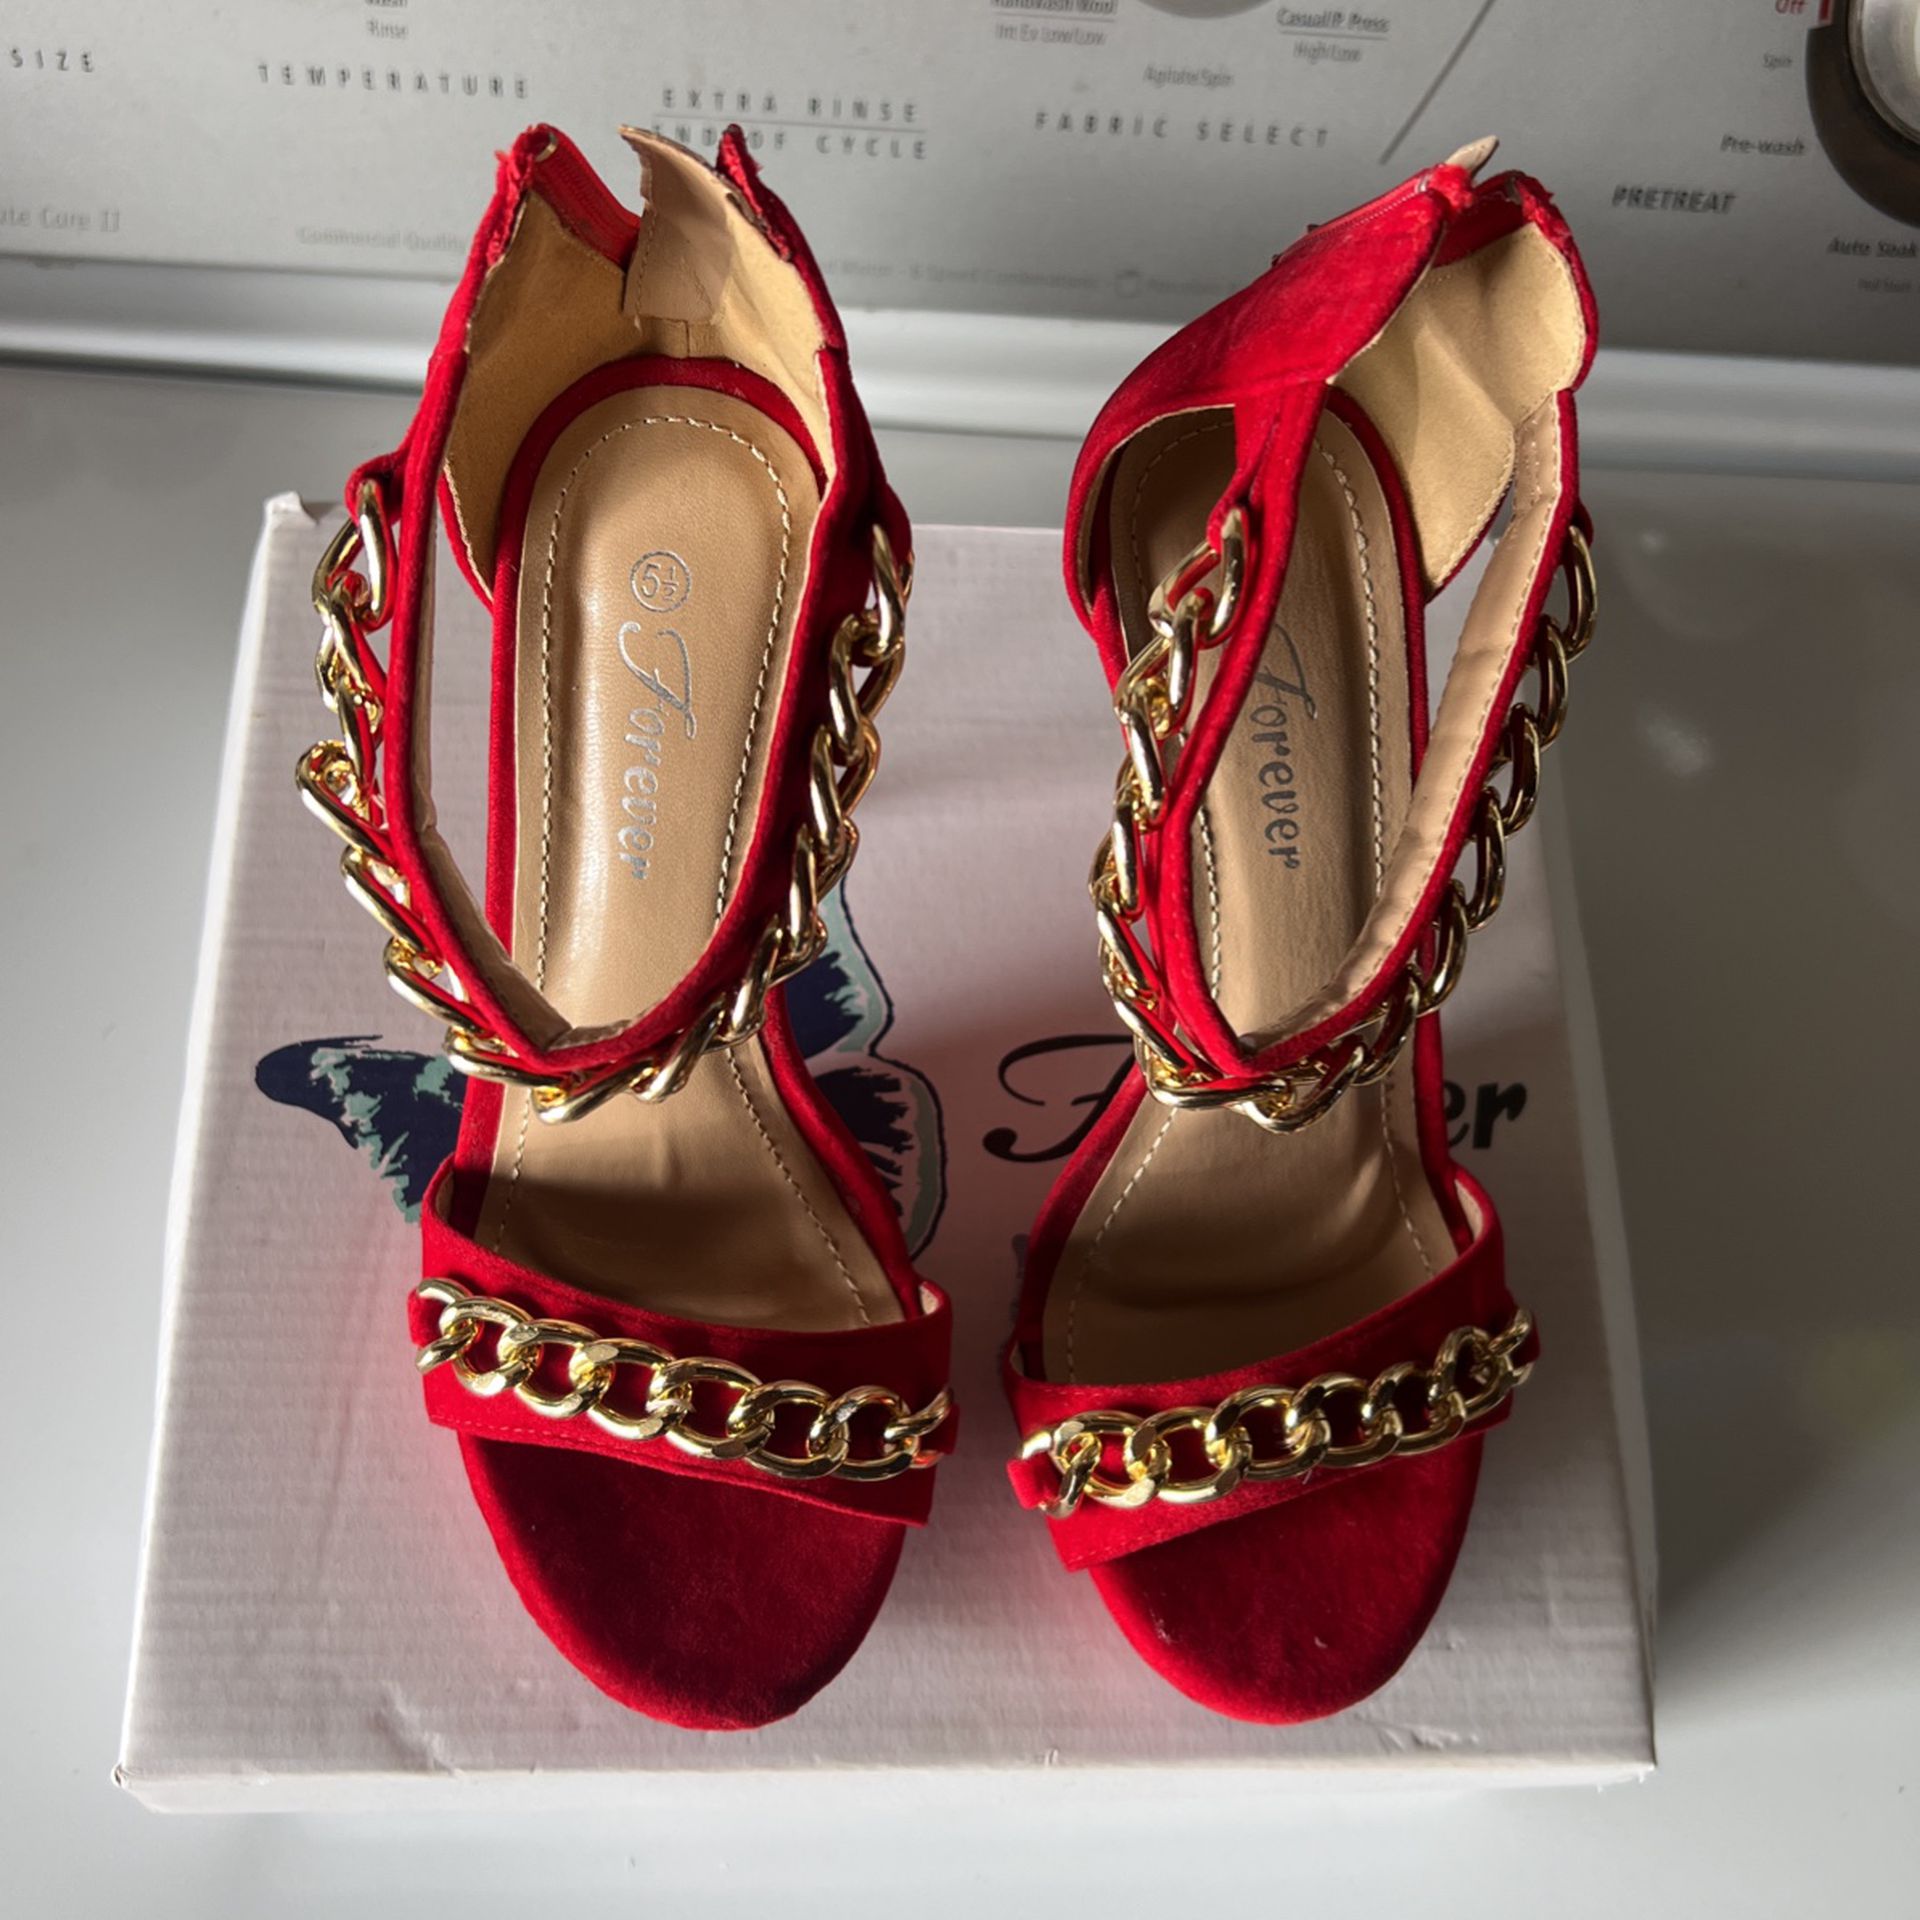 Red Heels Forever Size 5.5 